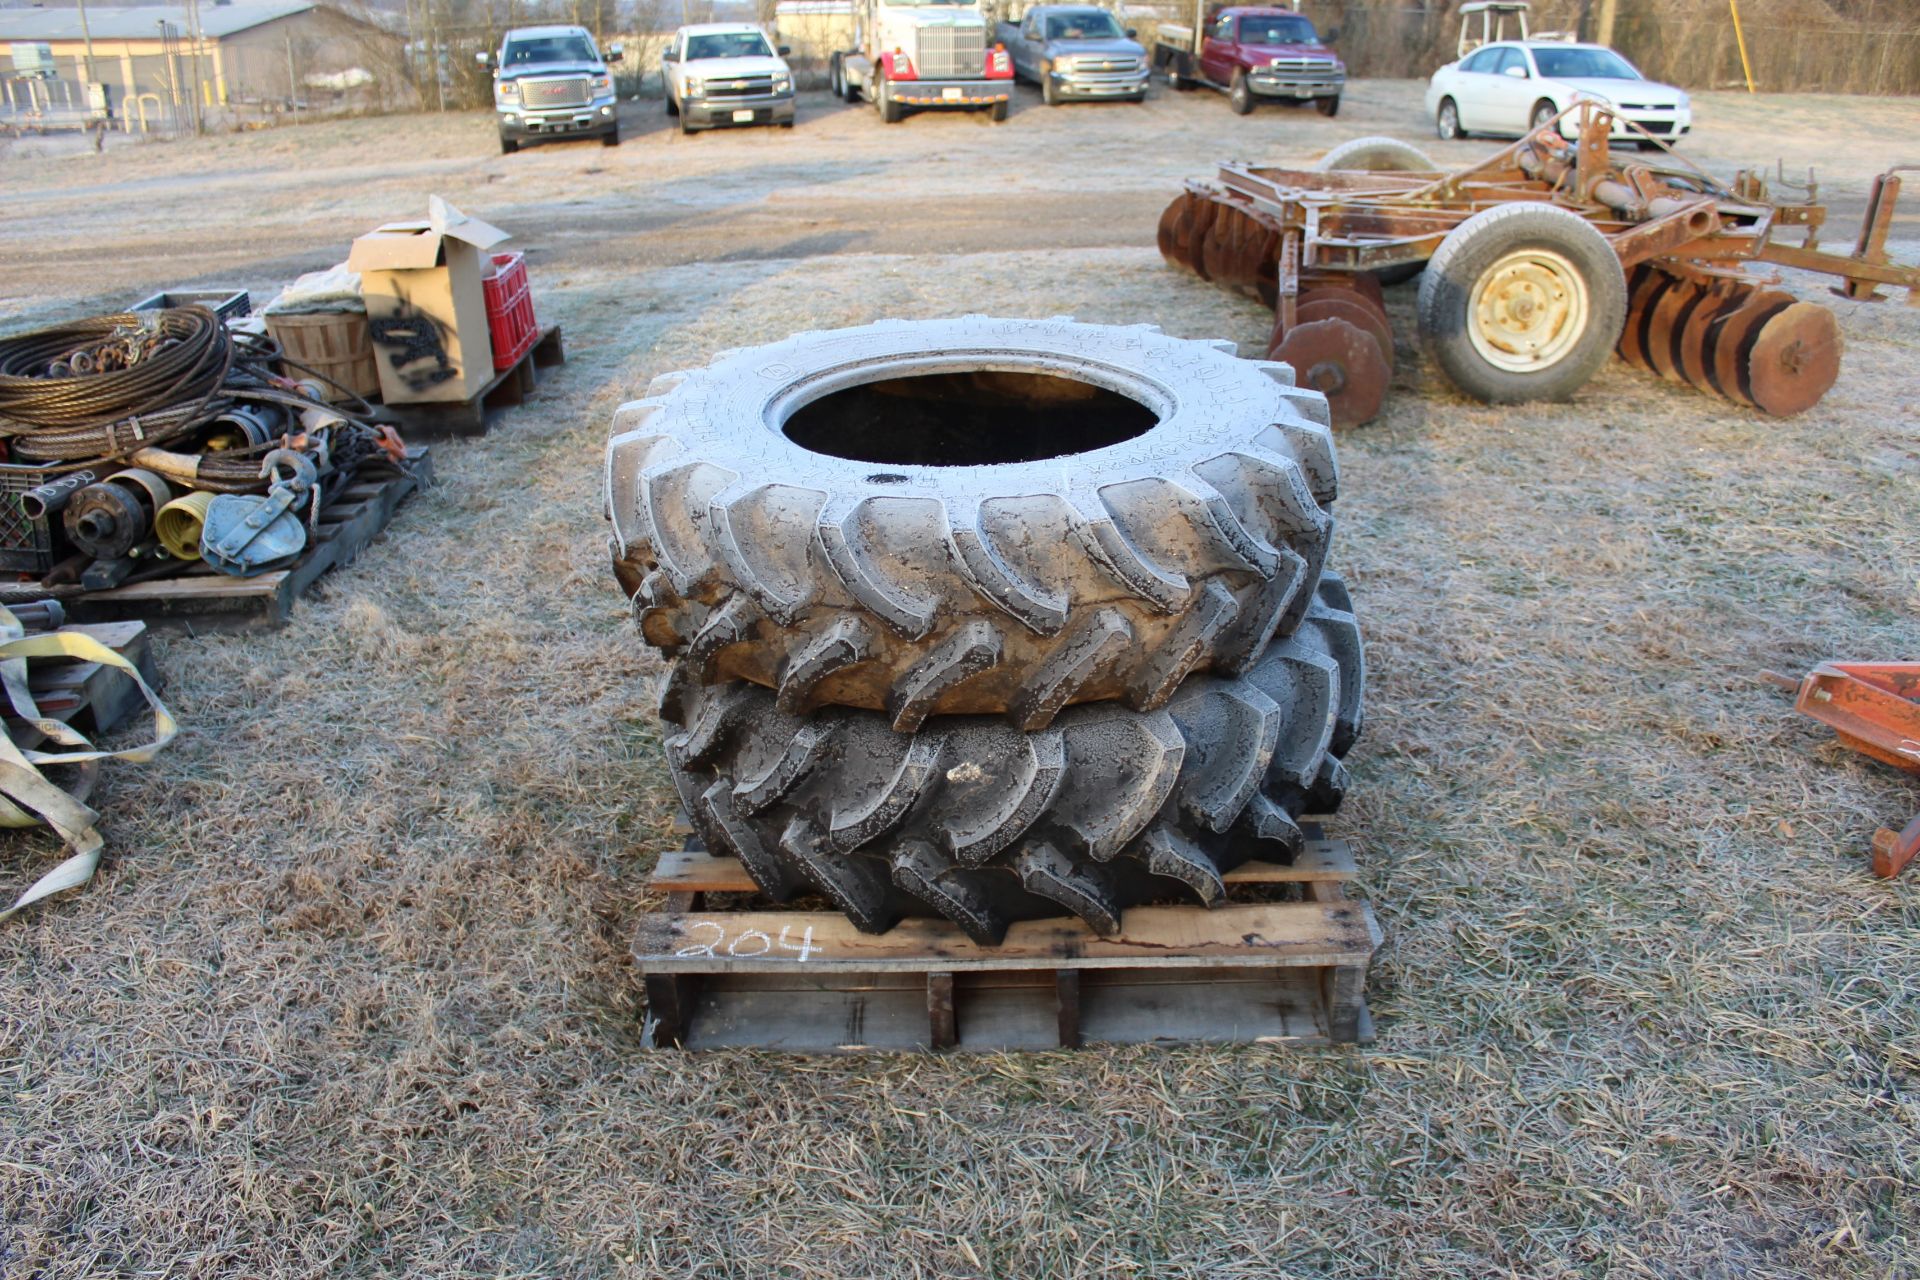 (2) NEW 340/85R 24 TRACTOR TIRES